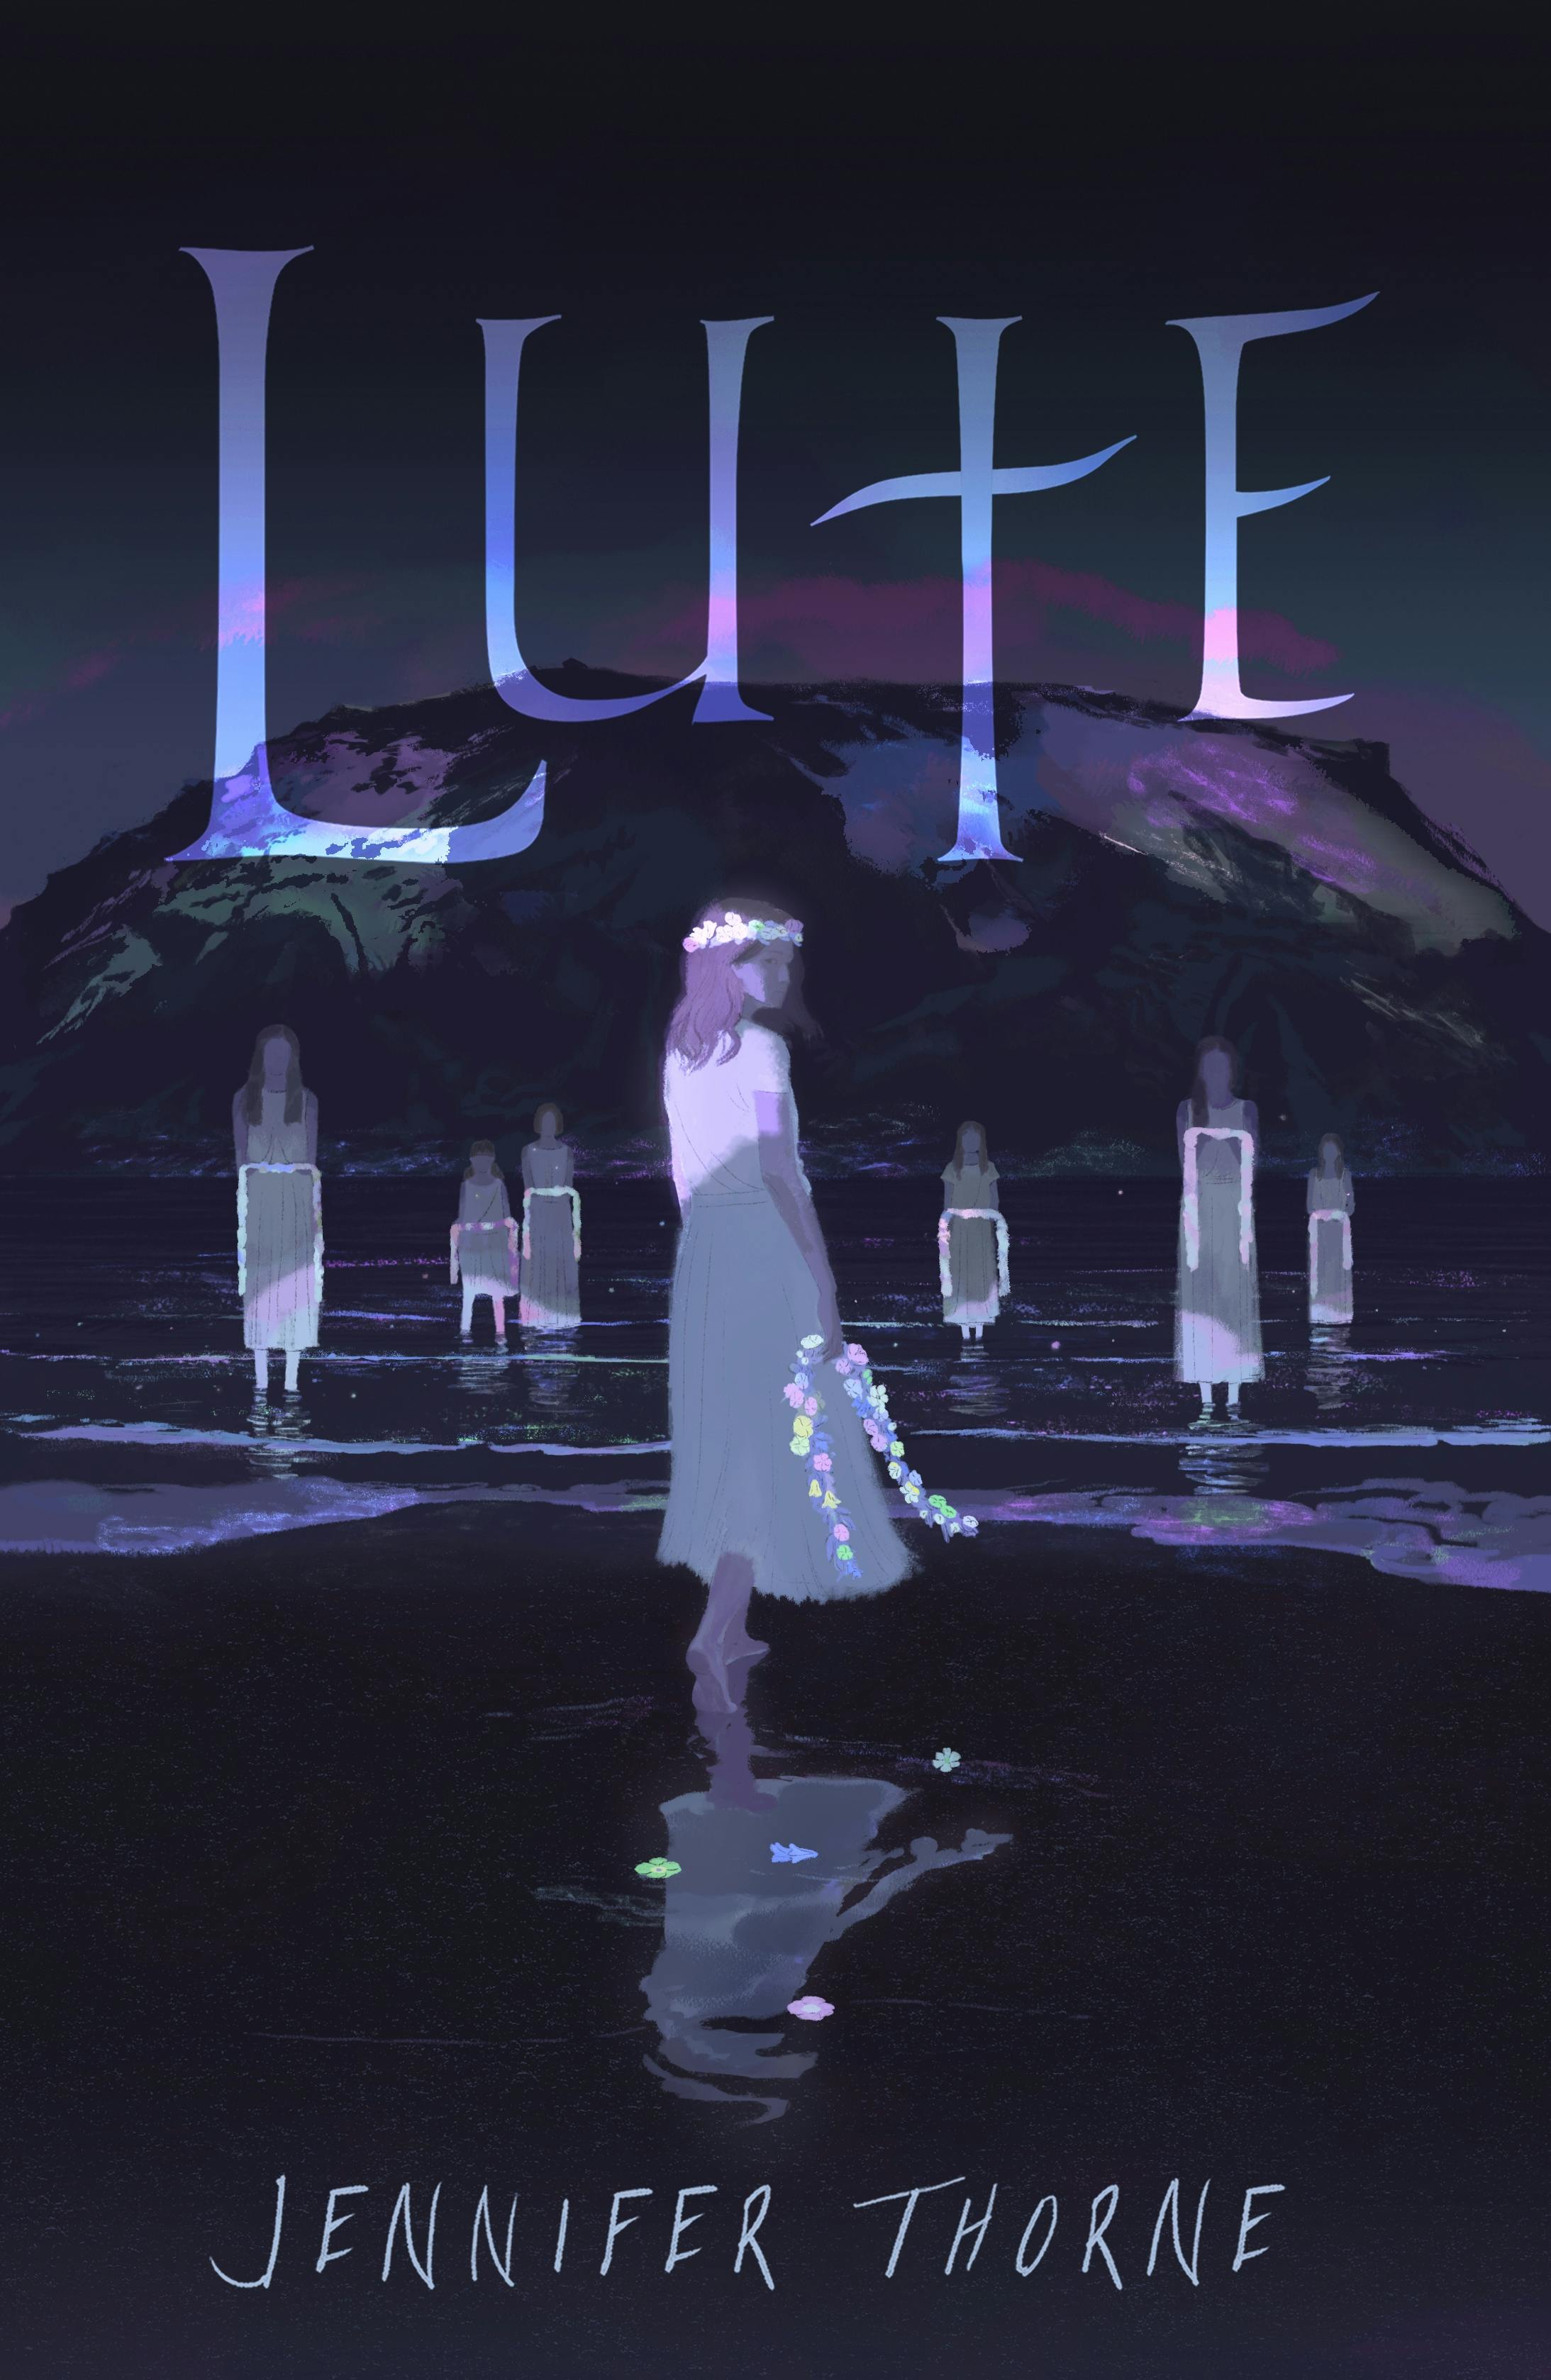 Cover for the book titled as: Lute